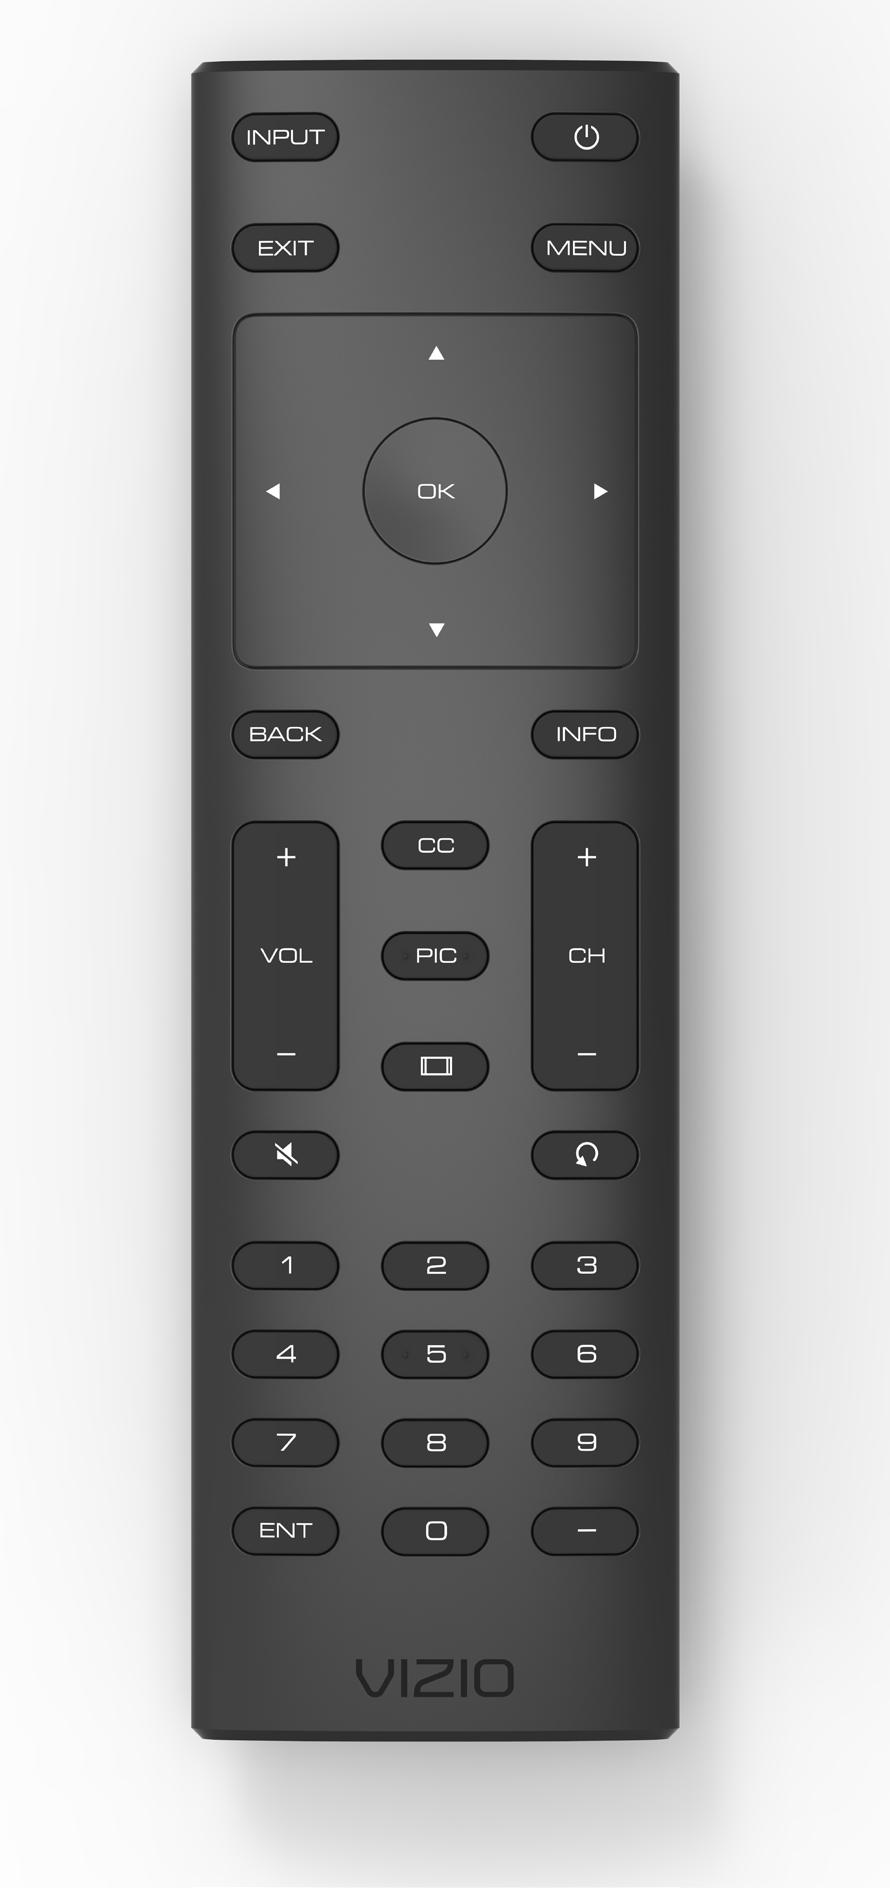 1 USING THE REMOTE 2 1 3 4 5 6 7 8 9 10 11 13 12 14 15 16 1. Power - Turn TV on or Off. 2. Input - Change the currently displayed input. 3. Exit - Close the on-screen menu.